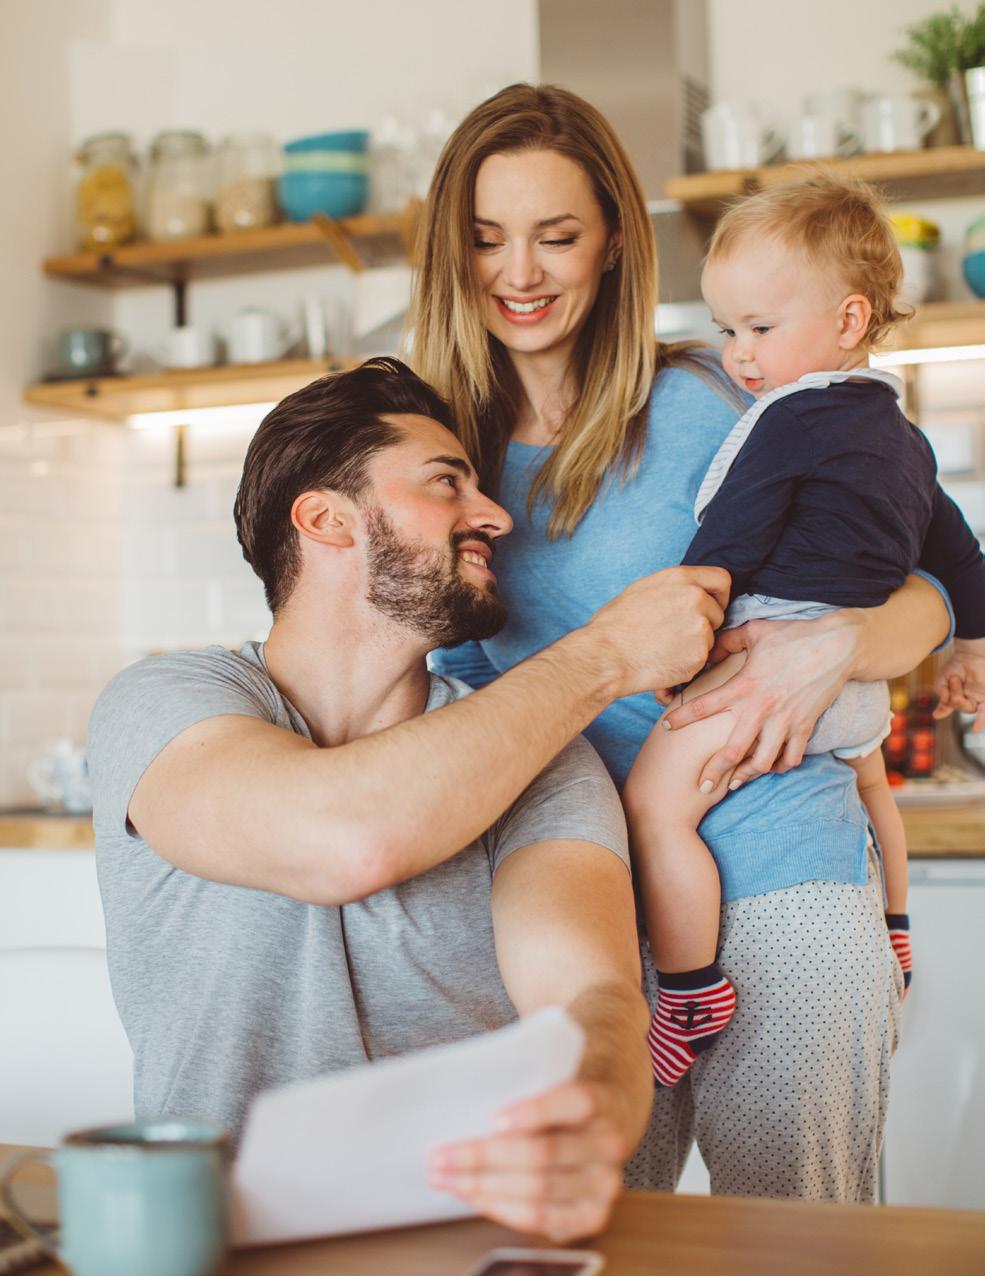 How Term Life Insurance Works 1. Choose the policy term. The term you choose depends on how long your family would need income replacement after you re gone as well as what you can afford. 2.